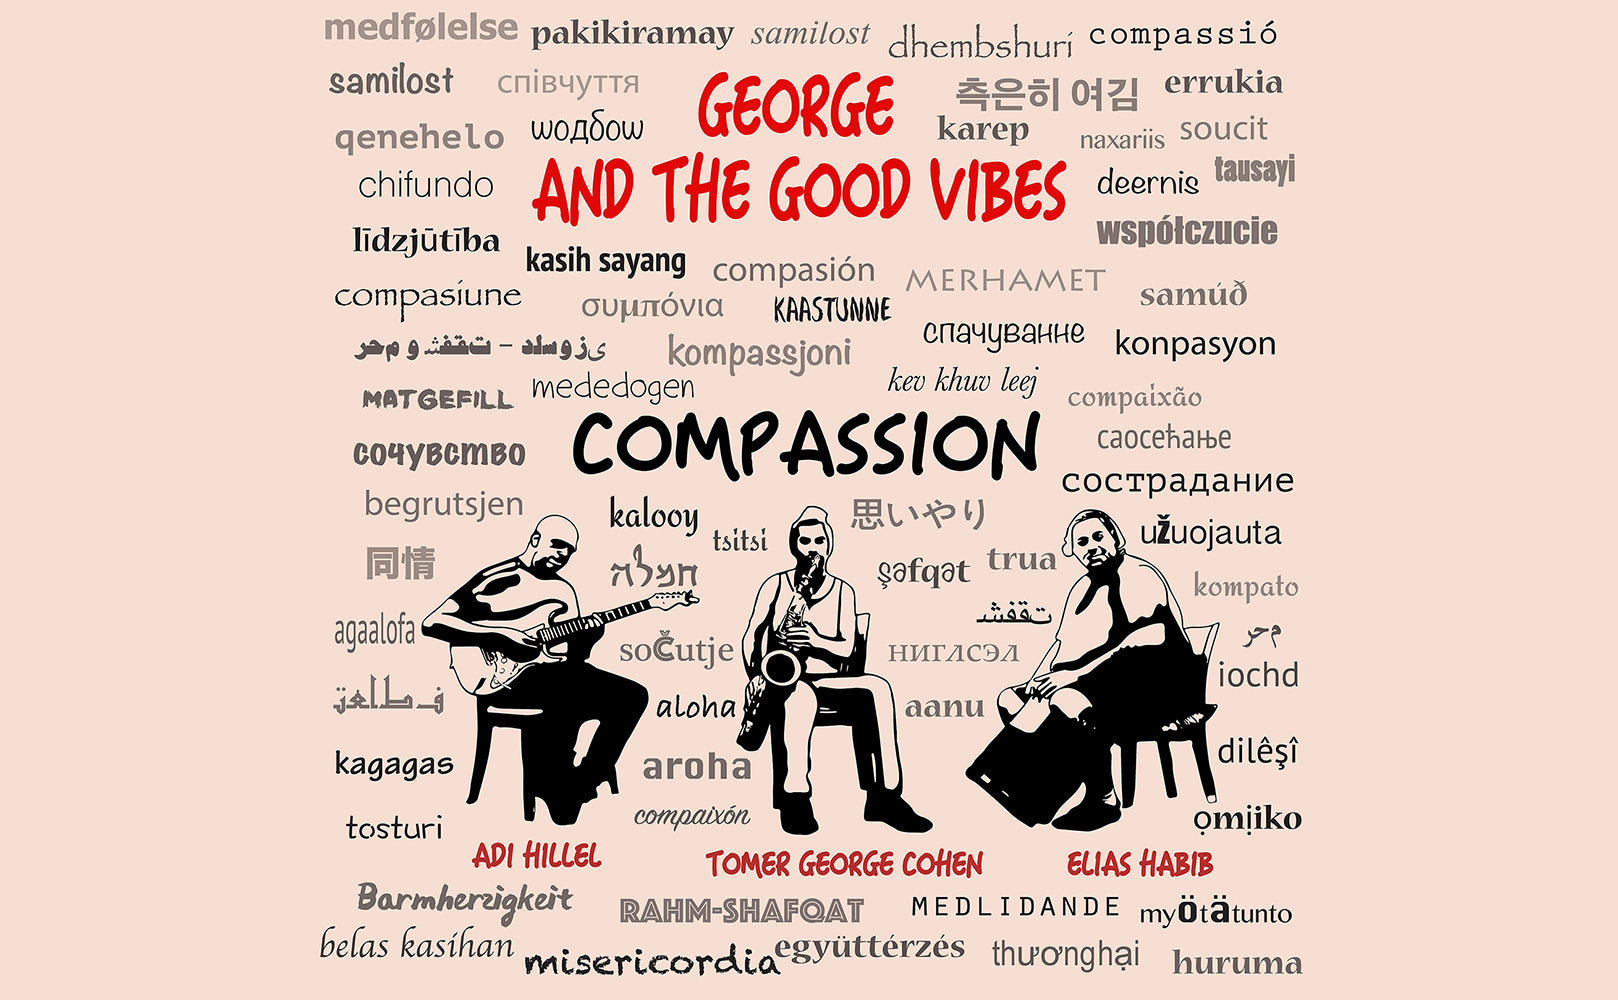 George And The Good Vibes - Compassion